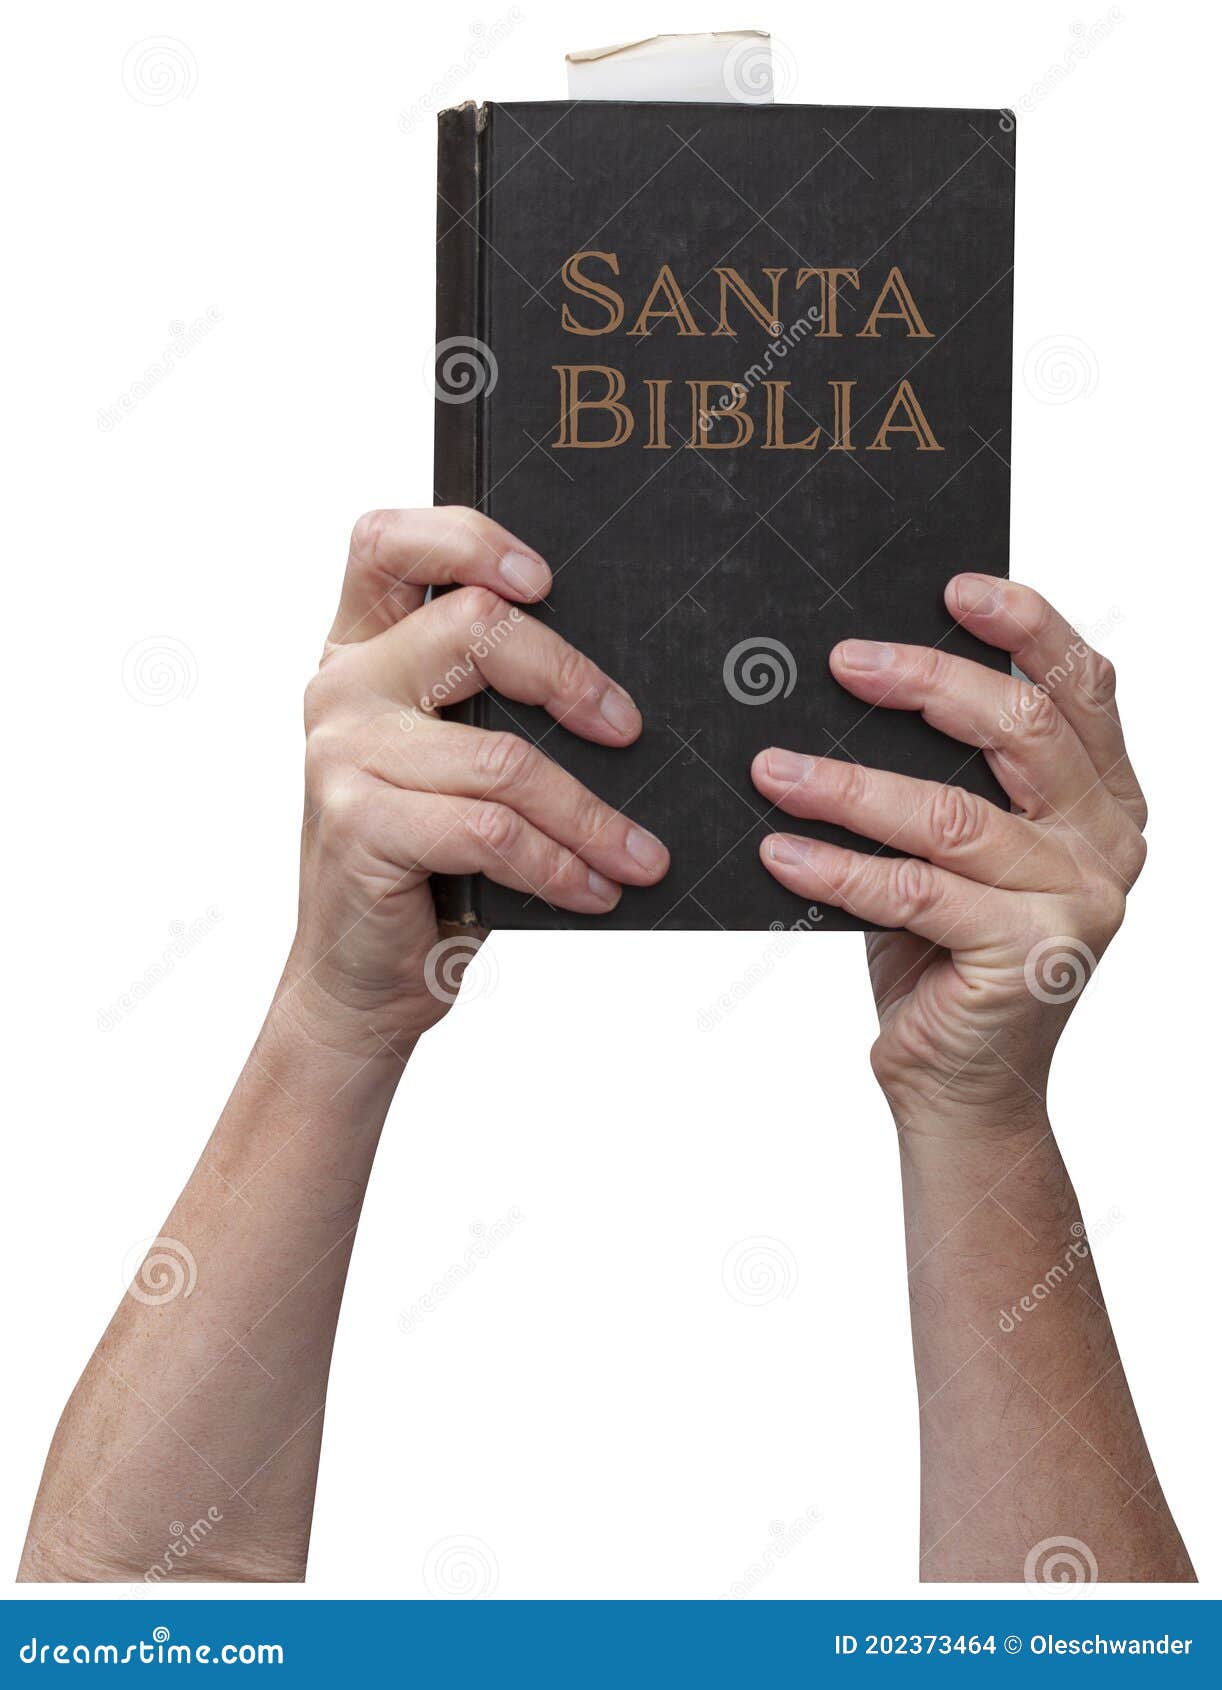 arms raised into the air with hands reaching up and holding the santa biblia - holy bible in spanish